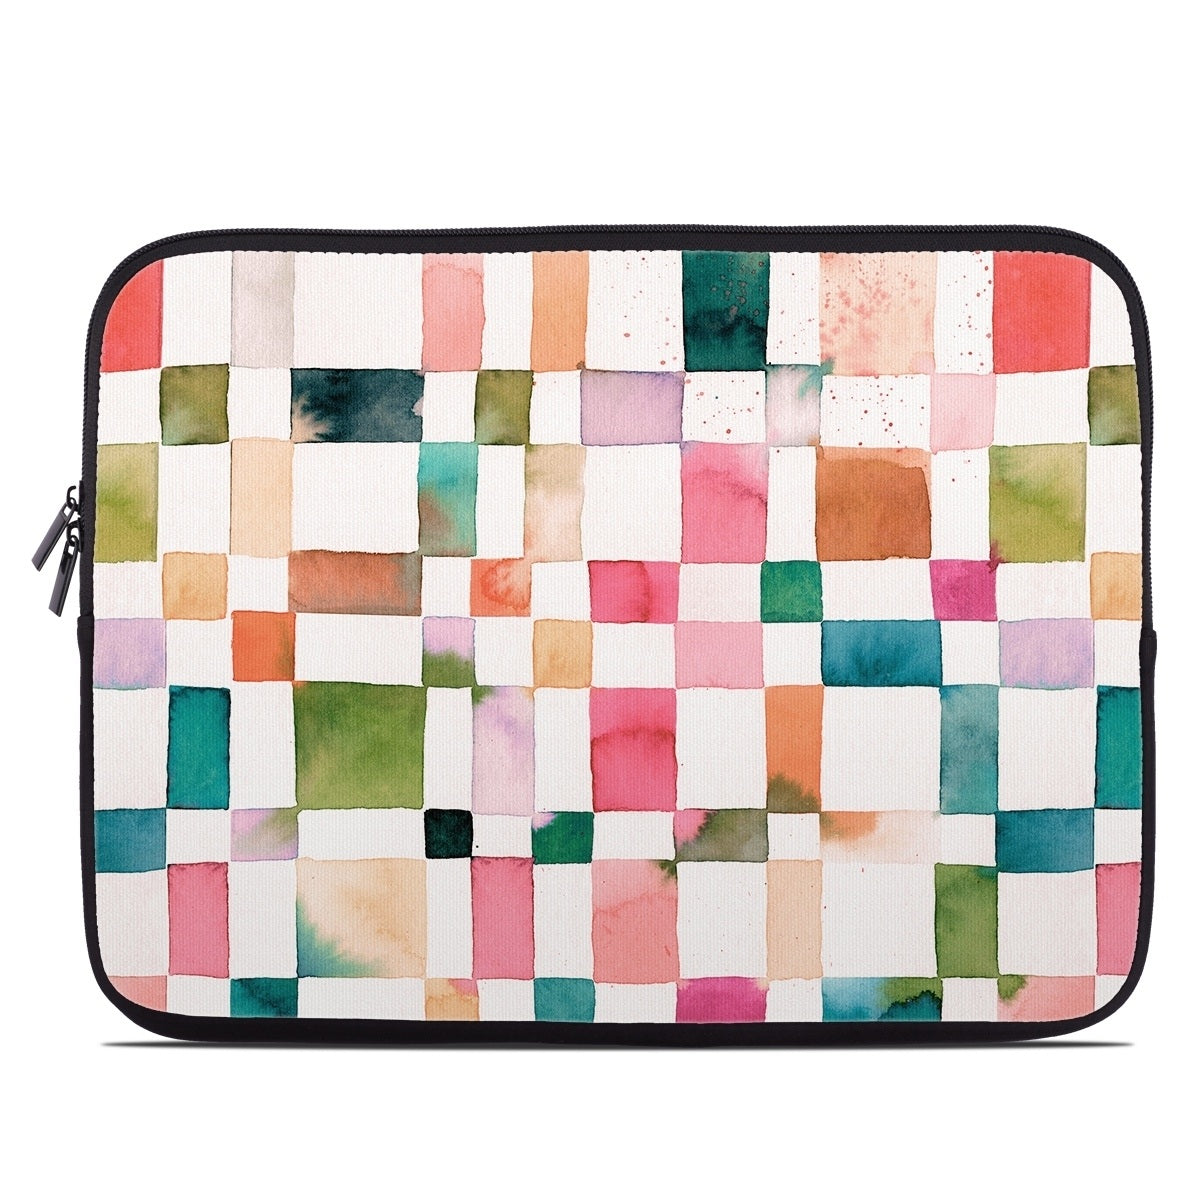 Watercolor Squares - Laptop Sleeve